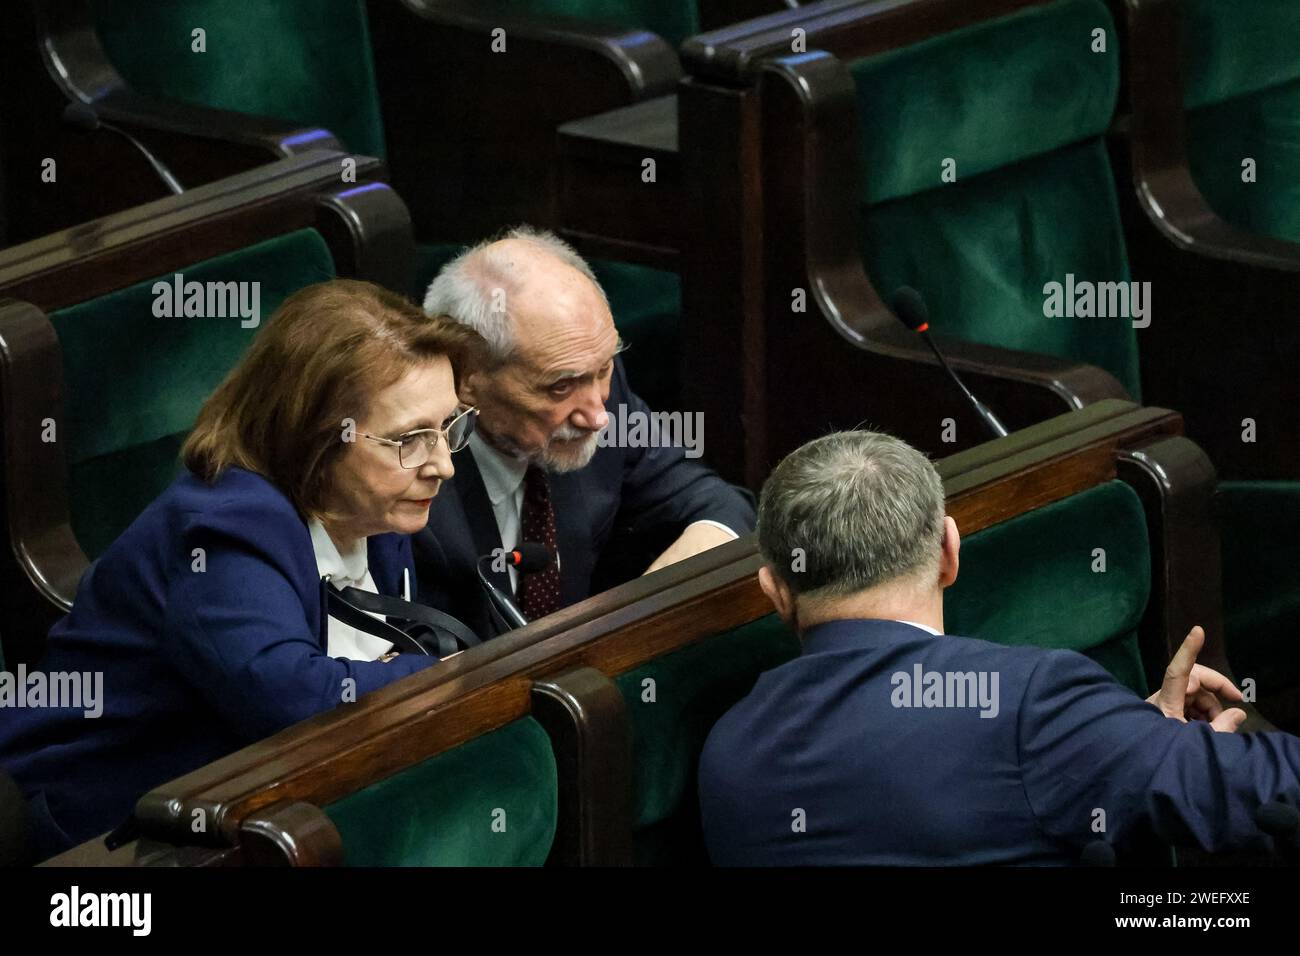 Warsaw, Poland, January 25, 2024.Antoni Macierewicz (middle), former Minister of Defence of Poland attends the 4th session of Polish Parliament that takes place amid chaos created by legal disagreement with the previous government. Current government took over the power in Poland December 13 2023, Taking over from the Law and Justice political party, who has ruled for 8 years. Both sides accuse each other of unconstitutional acts, and de facto two legal systems are present in the country. Credit: Dominika Zarzycka/ Alamy Live News Stock Photo